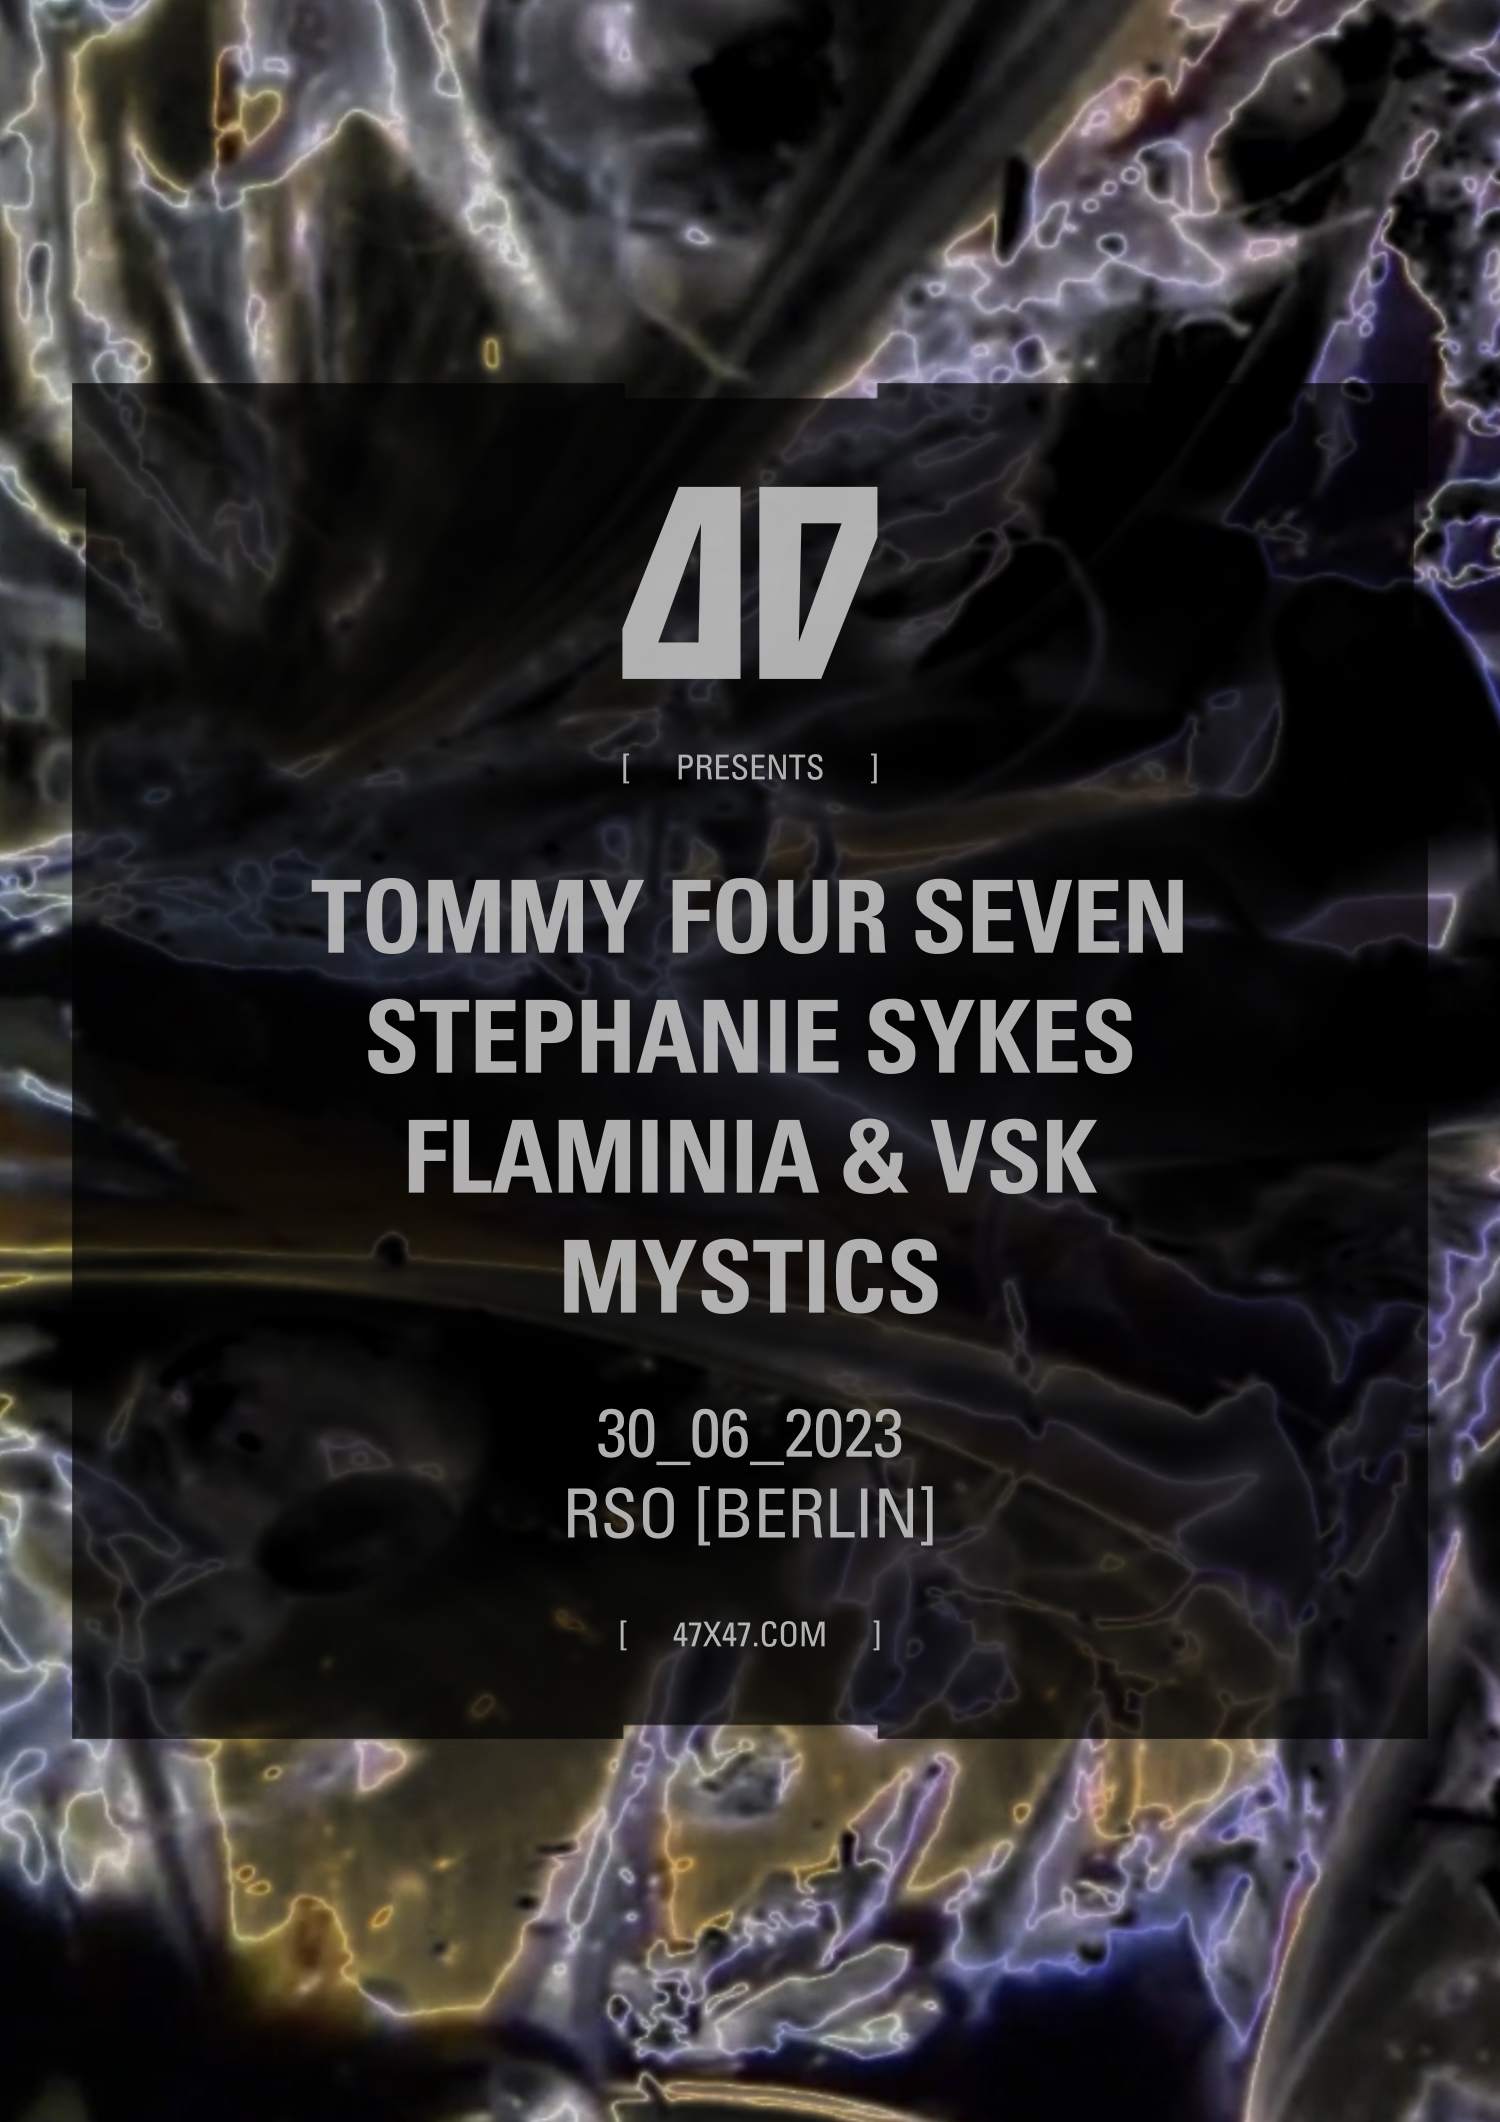 47 with Tommy Four Seven, Stephanie Sykes, Flaminia & VSK, Mystics - フライヤー表